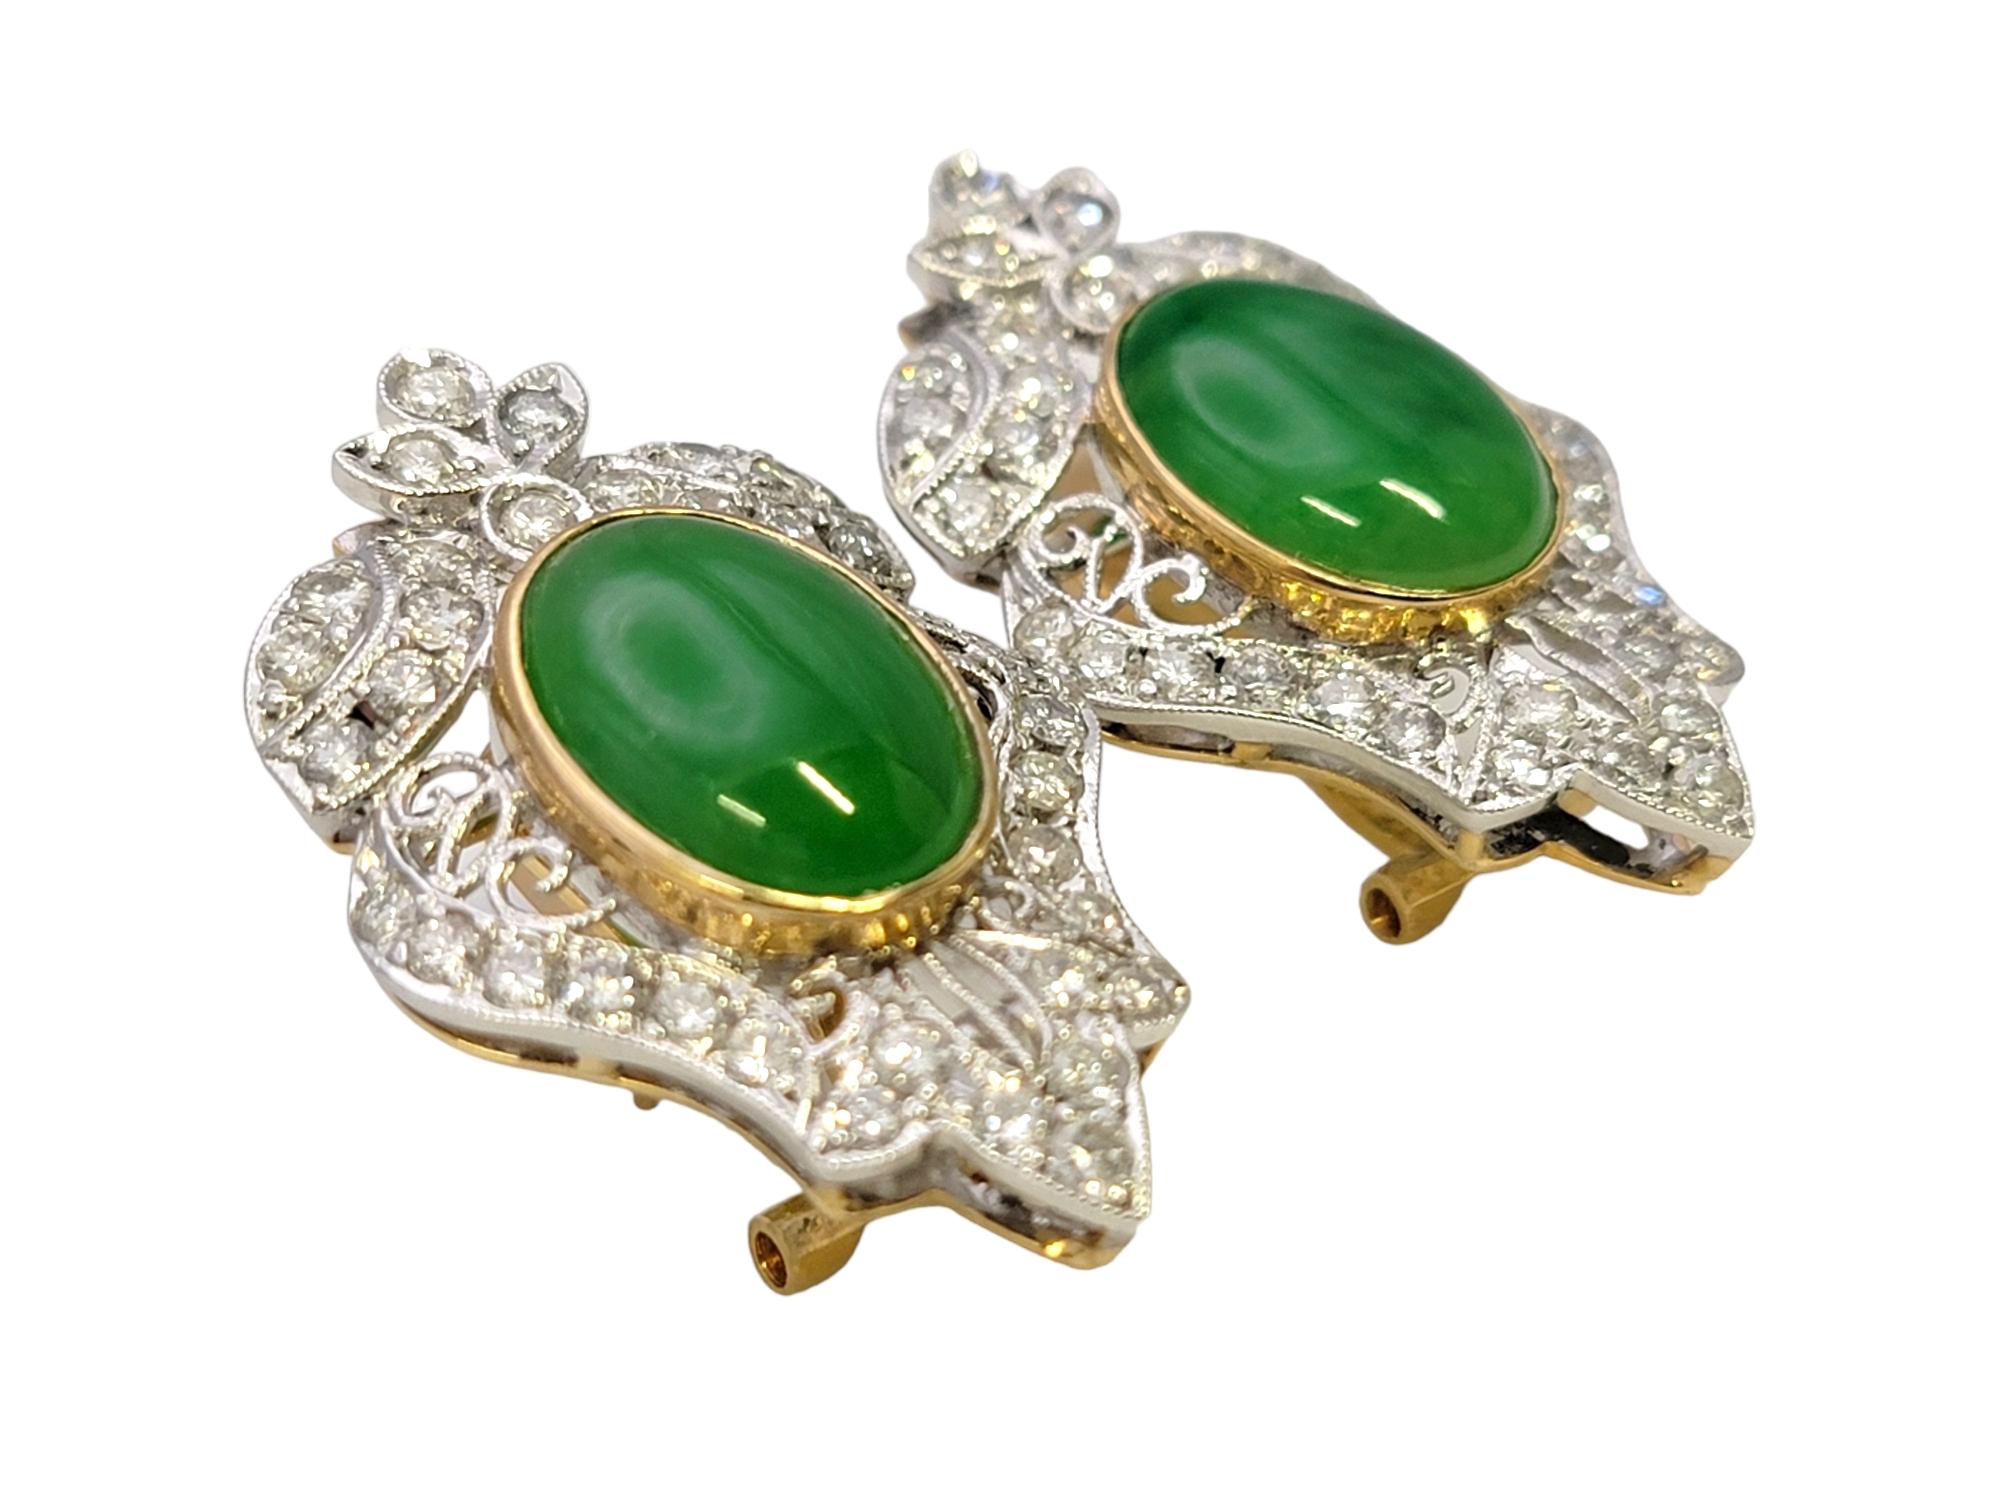 Intricately designed jade and diamond earrings with a gorgeous, Old World inspired design. These substantial studs sparkle beautifully in the light while the bright green jade radiates among the elaborate setting. 

These stunning earrings each